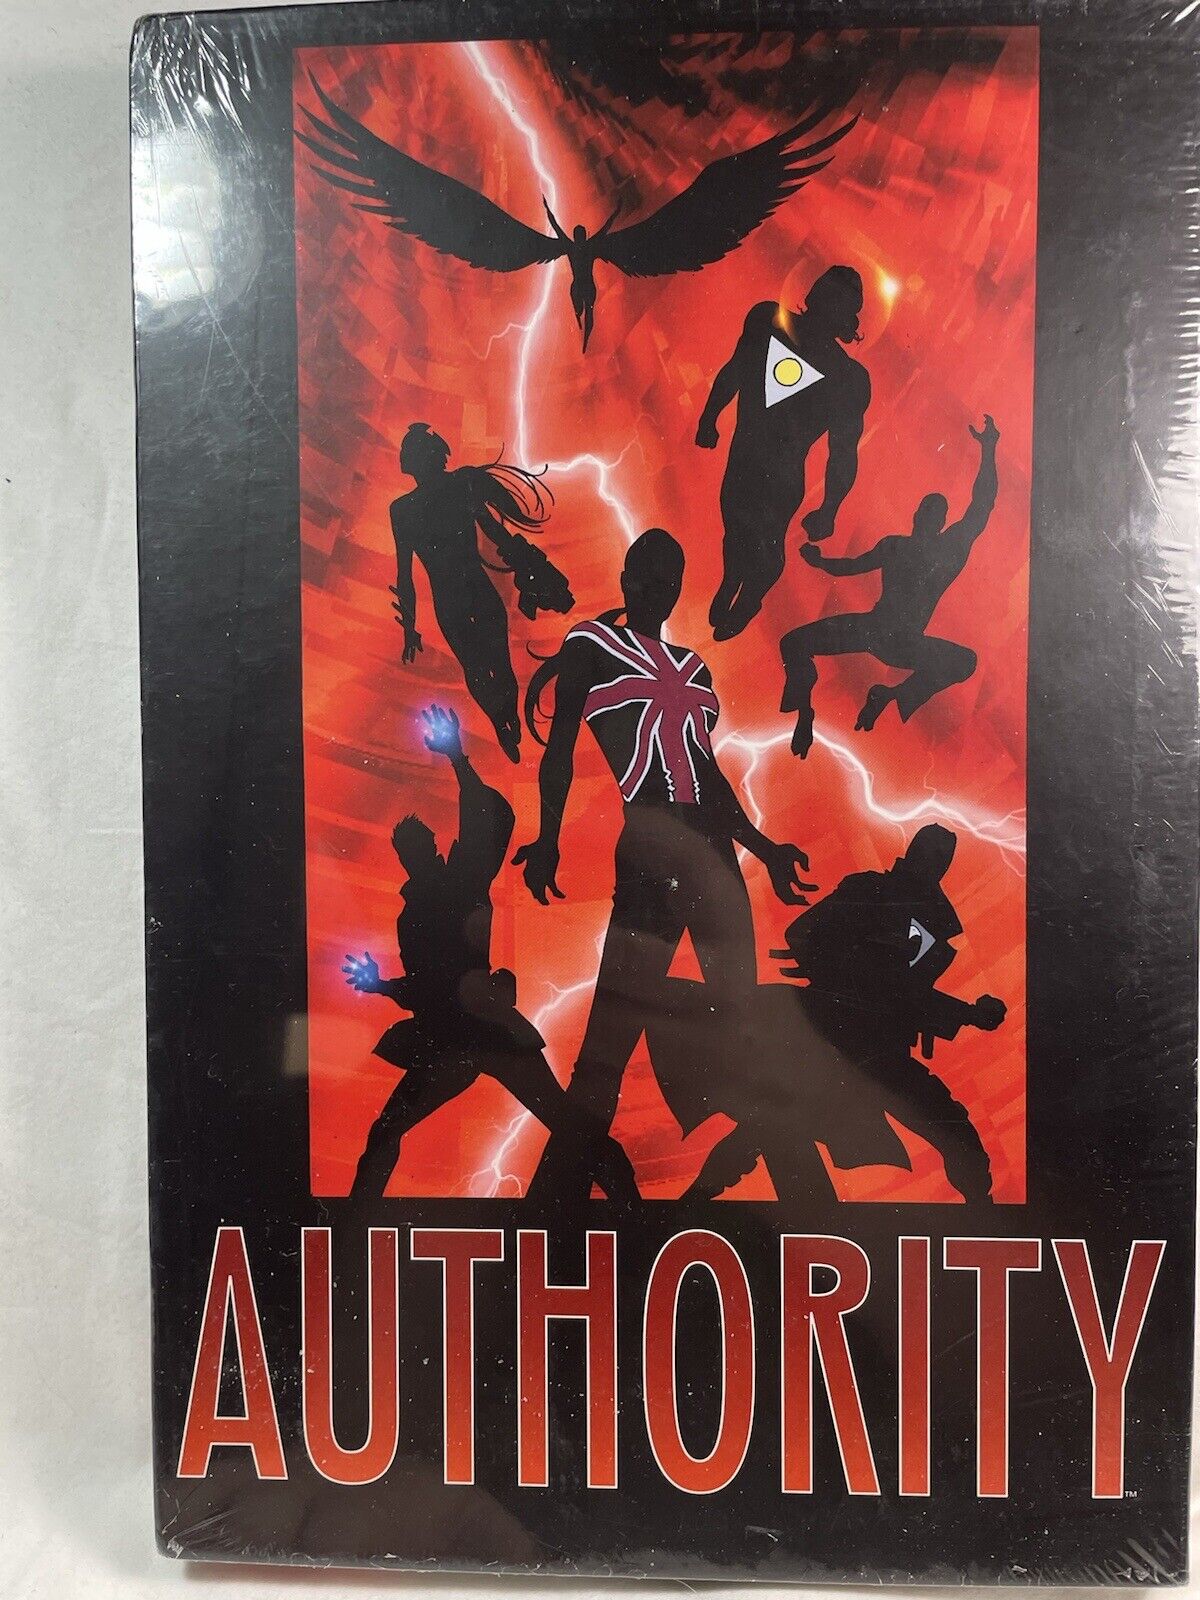 ABSOLUTE AUTHORITY Vol. 1 Wildstorm DC Slipcase Hardcover 1ST PRINT SEALED RARE